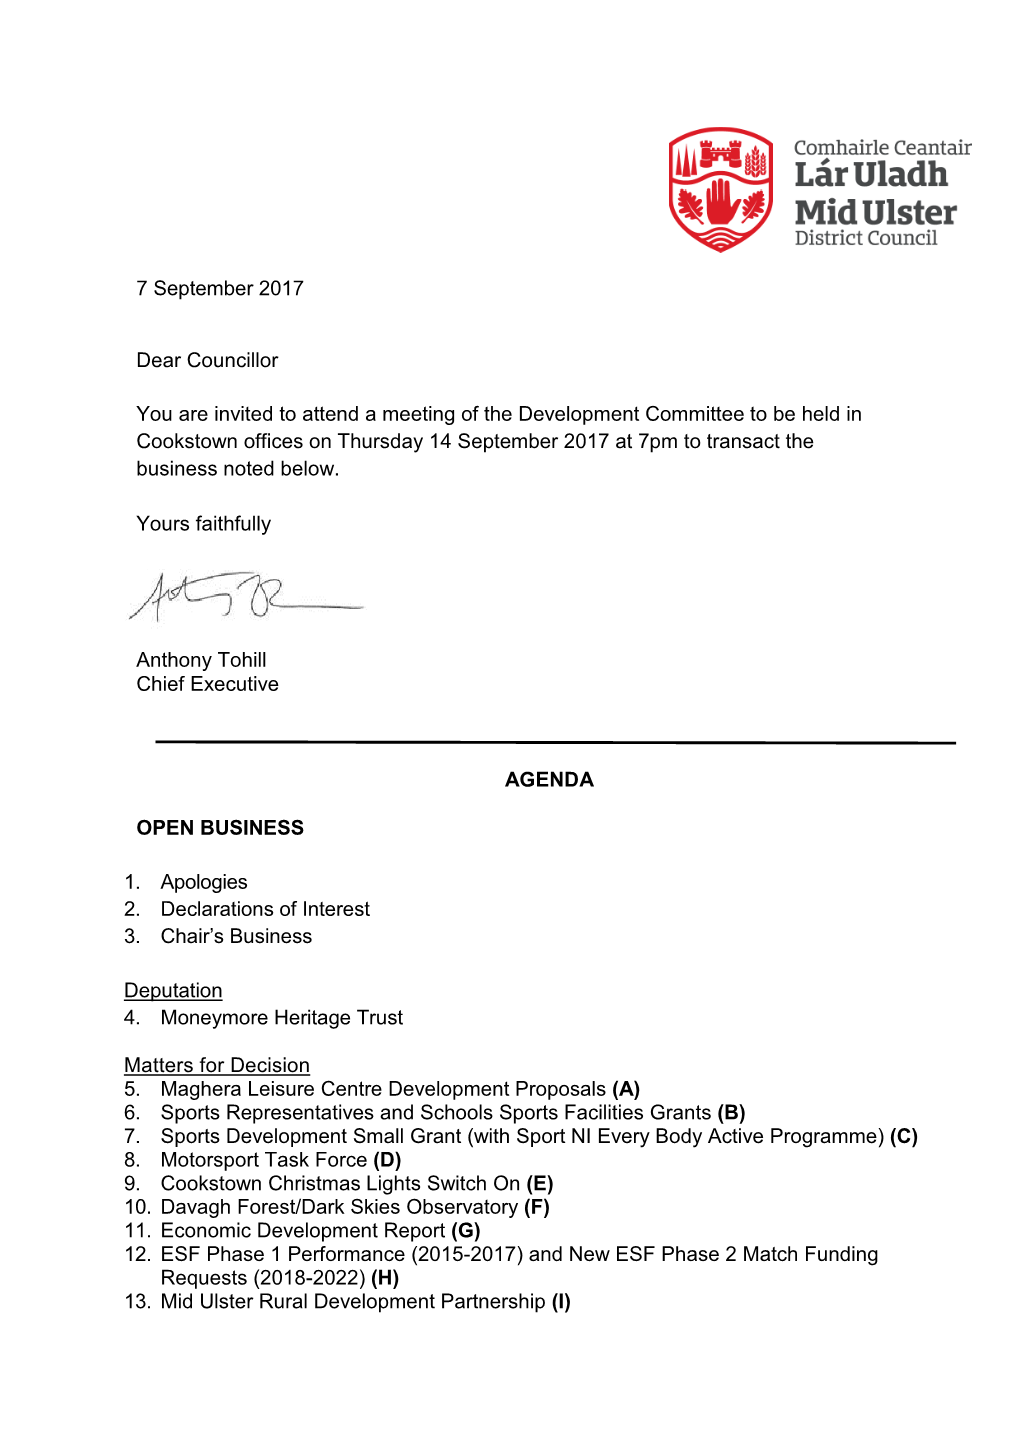 7 September 2017 Dear Councillor You Are Invited to Attend a Meeting of the Development Committee to Be Held in Cookstown Office